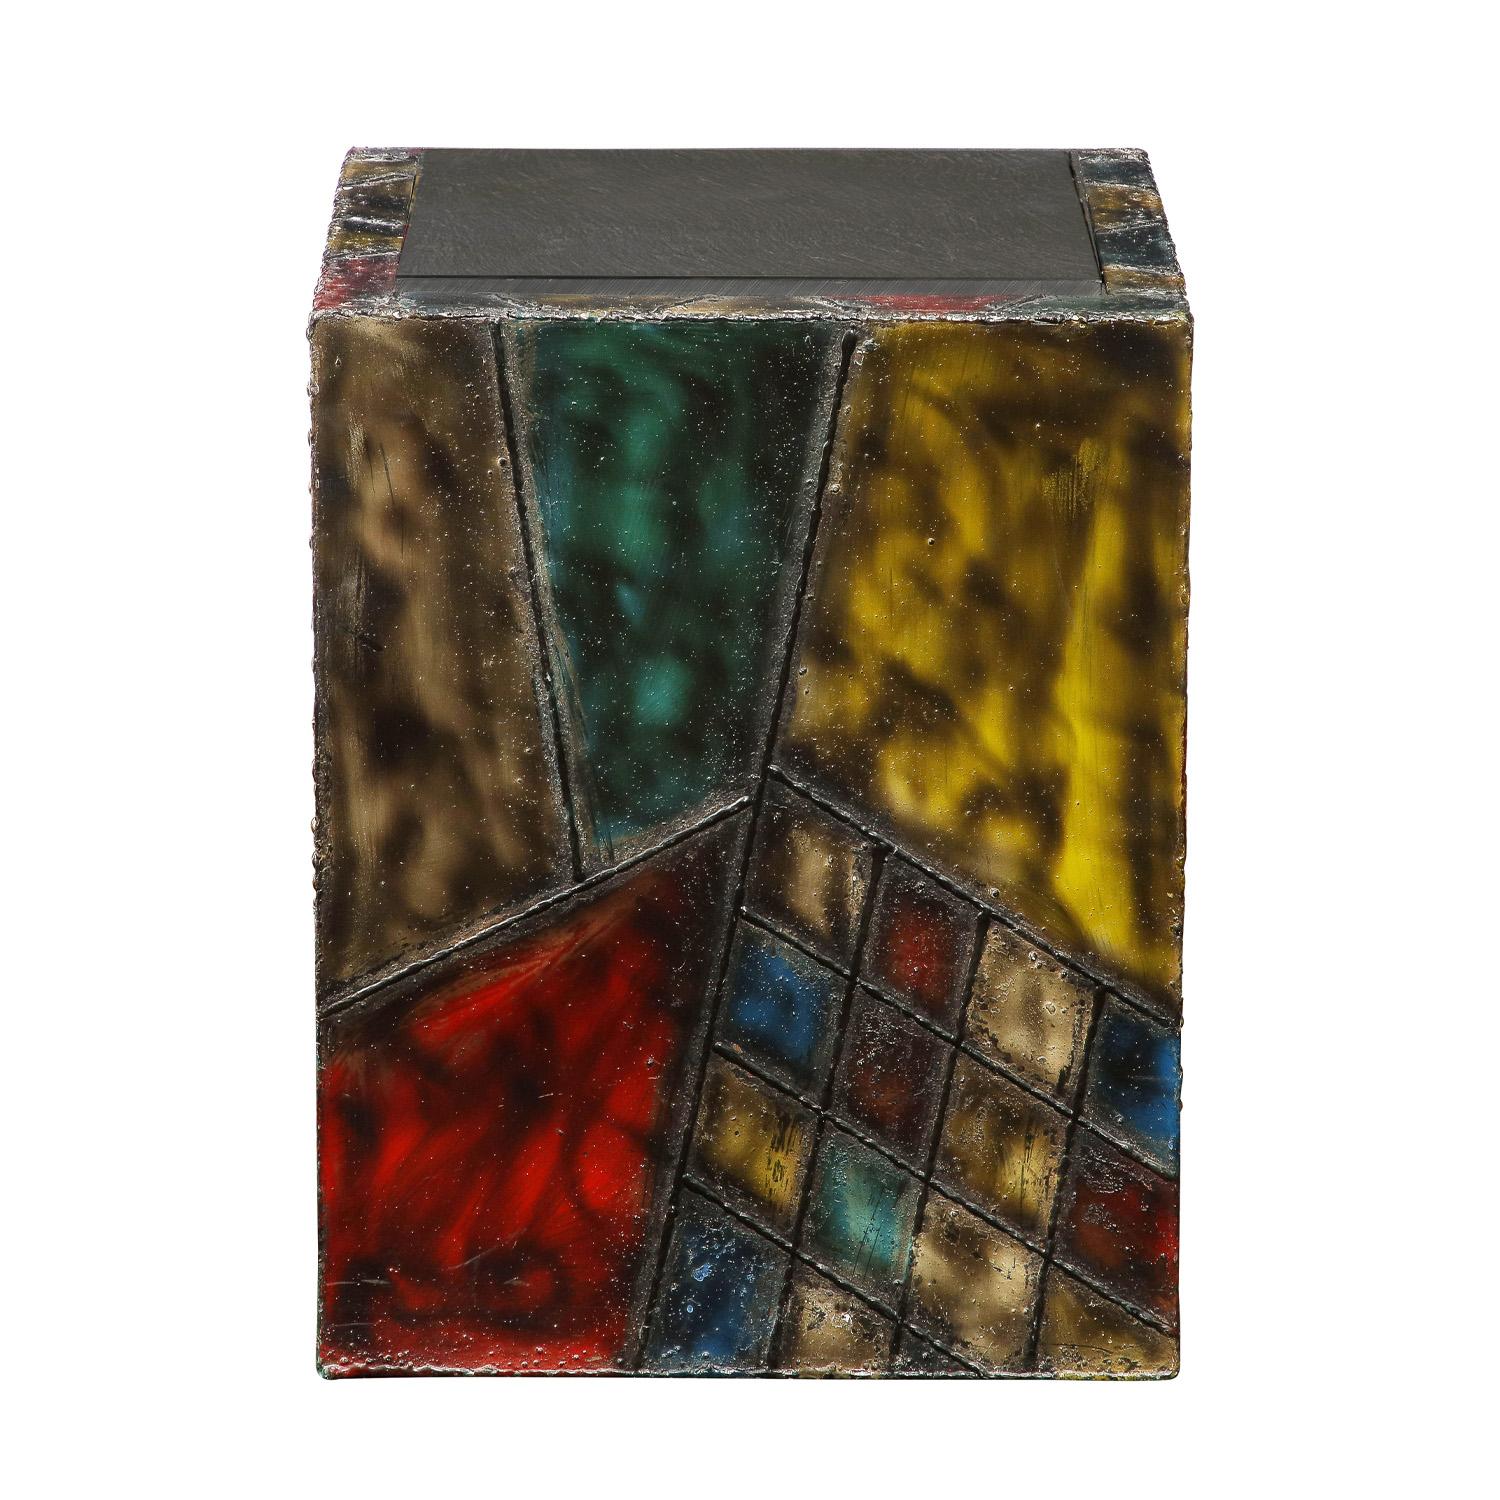 Cube Table in hand-welded steel with beautiful polychrome enamels and inset cleft slate top by Paul Evans, American 1973 (signed “PE 73” on bottom corner). This iconic table is a timeless Evans design. The coloration on this piece is